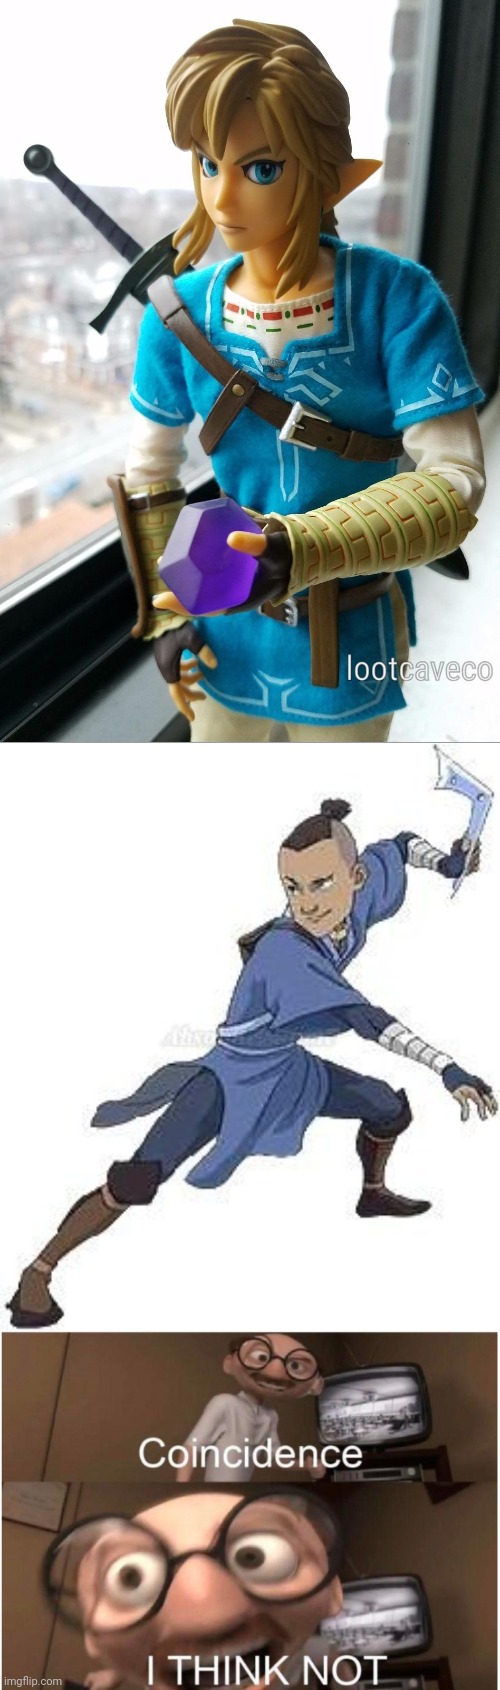 image tagged in coincidence i think not,avatar,avatar the last airbender,legend of zelda,link | made w/ Imgflip meme maker